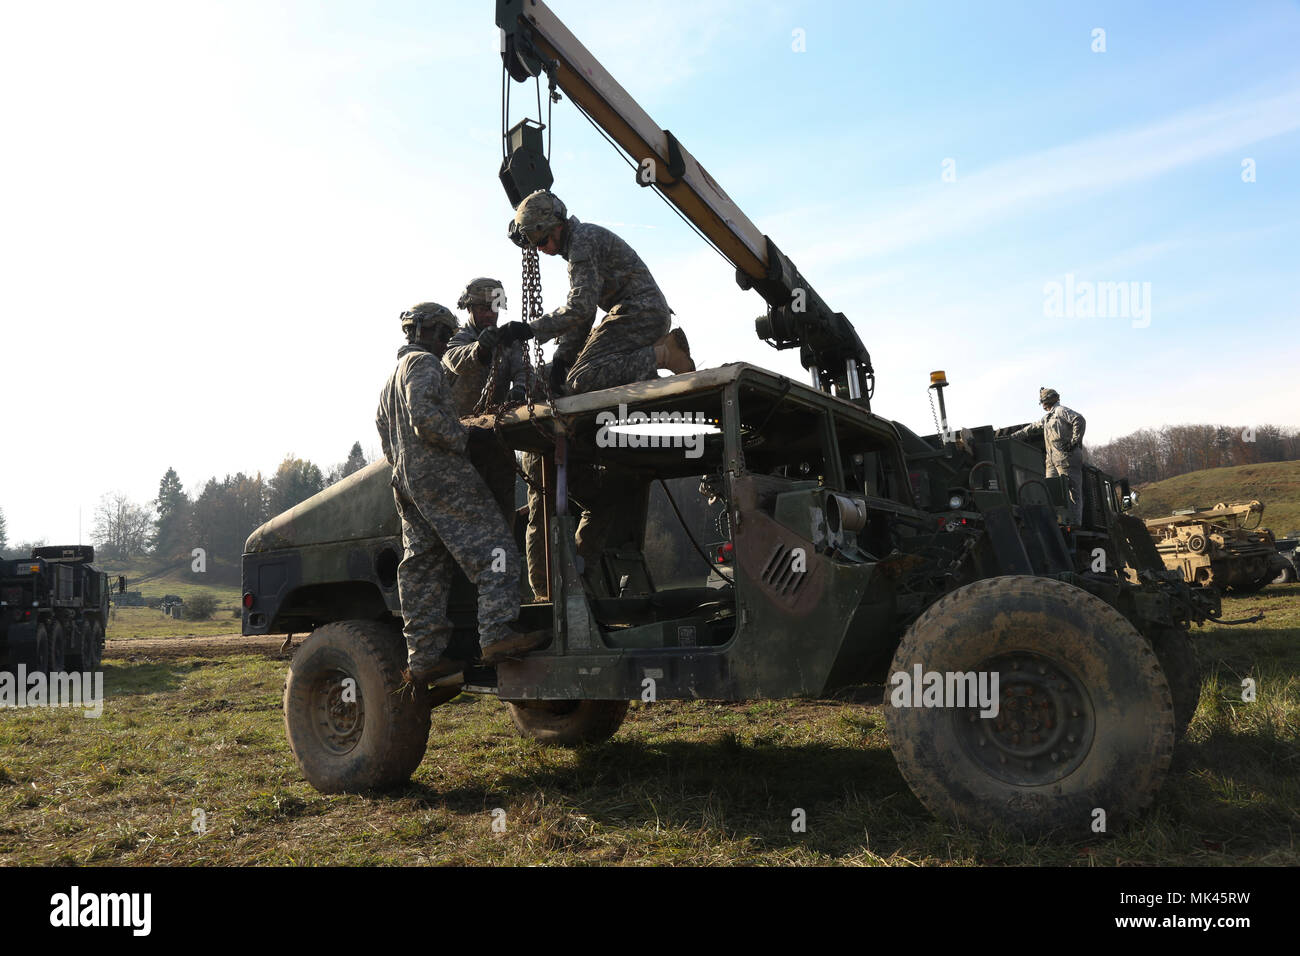 U.S. Soldiers of the 902nd Engineer Construction Company perform vehicle recovery operations in preparation of exercise Allied Spirit VII at the U.S. Army’s Joint Multinational Readiness Center in Hohenfels, Germany, Nov. 5, 2017. Approximately 4,050 service members from 13 nations are participating in exercise Allied Spirit VII at 7th Army Training Command’s Hohenfels Training Area, Germany, Oct. 30 to Nov. 22, 2017. Allied Spirit is a U.S. Army Europe-directed, 7ATC-conducted multinational exercise series designed to develop and enhance NATO and key partner’s interoperability and readiness.  Stock Photo